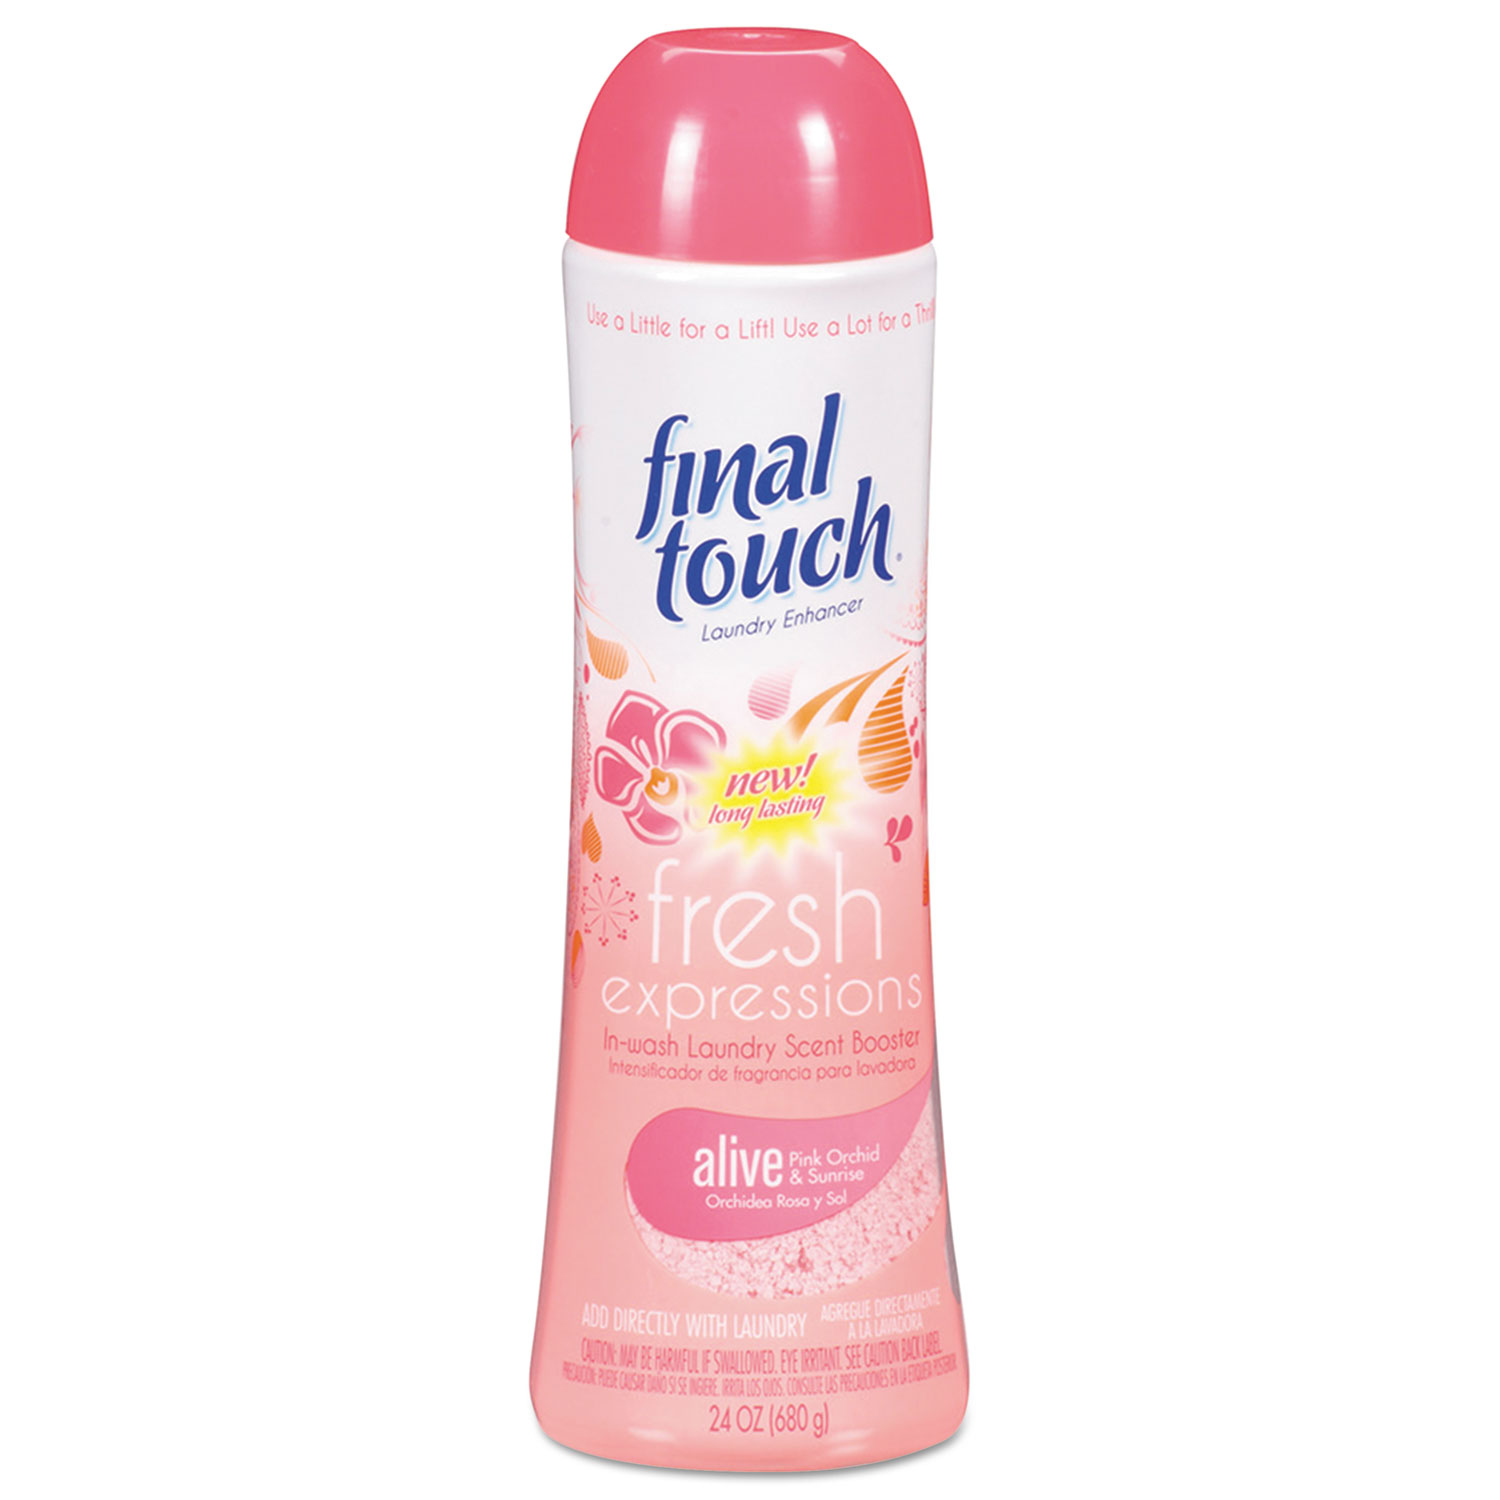 Fresh Expressions In-Wash Laundry Scent Booster, 24 oz, Powder, Pnk Orchid, 6/CT